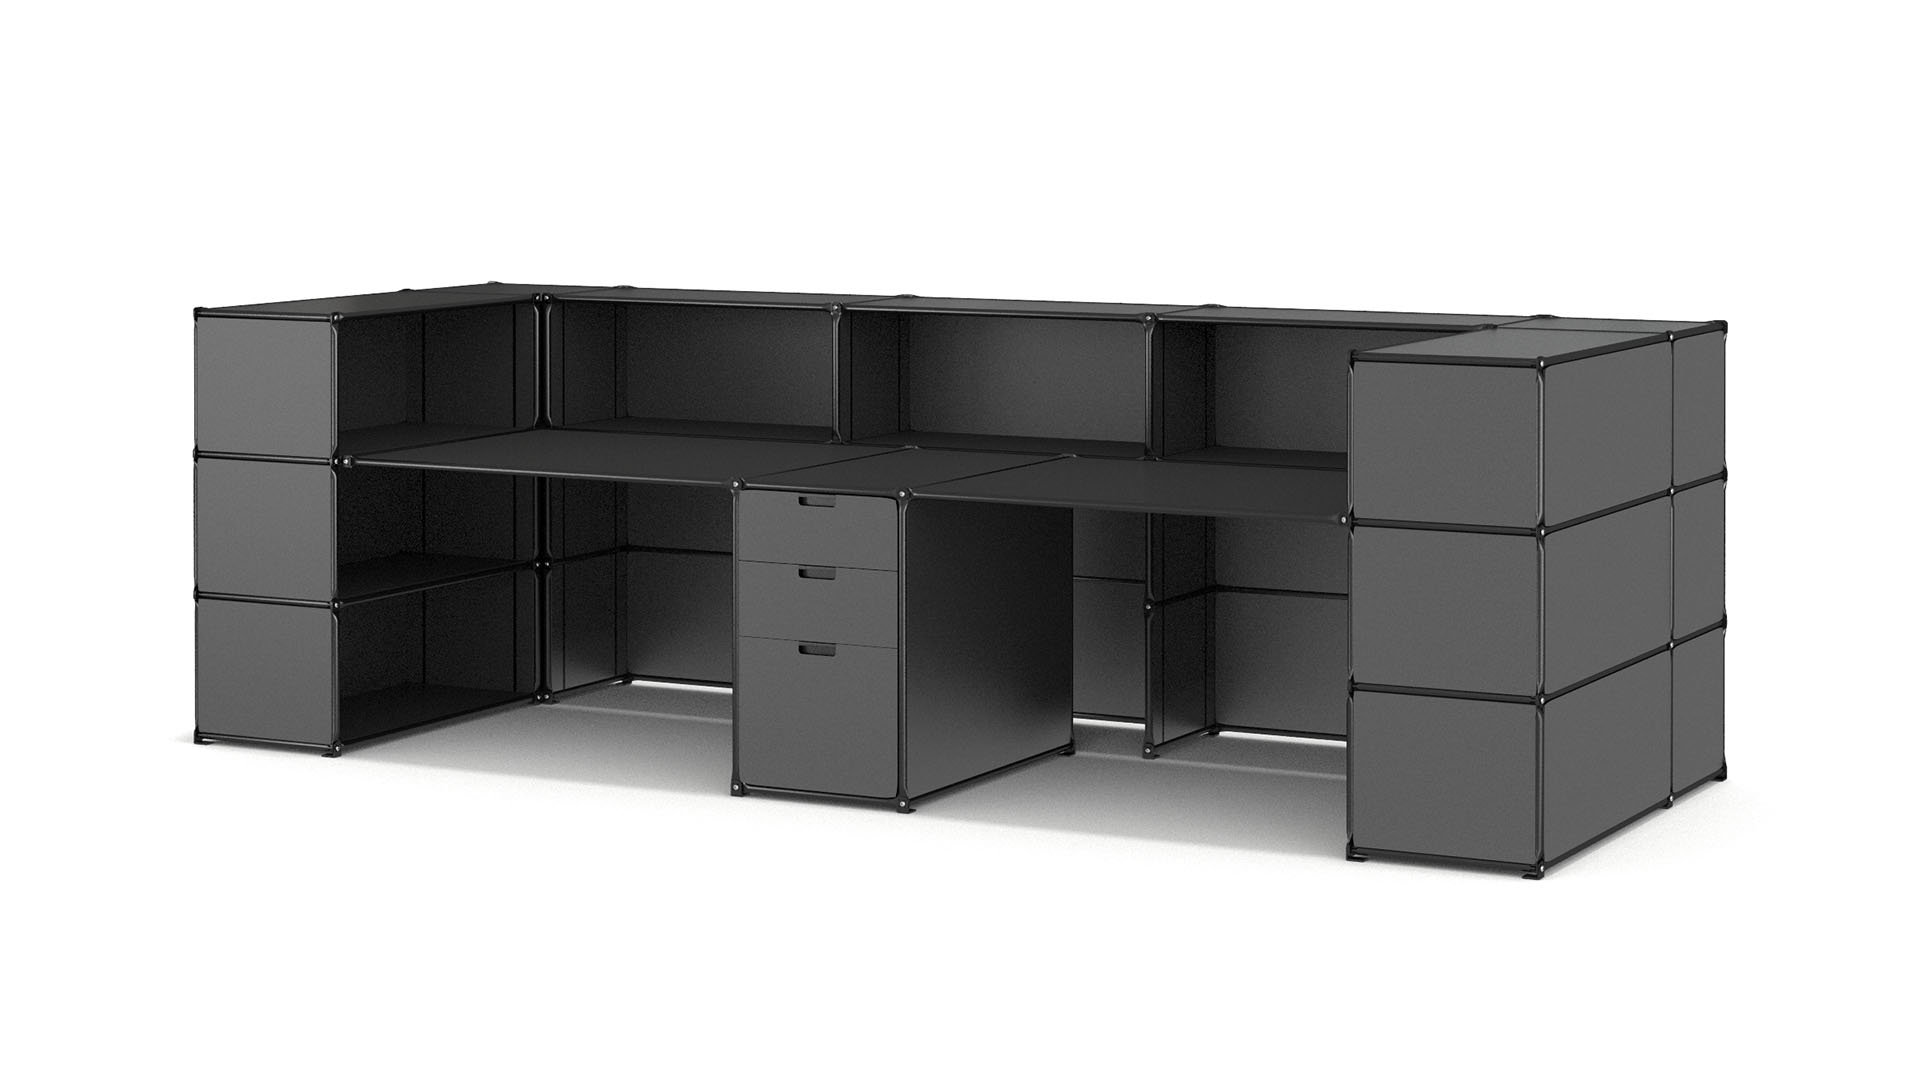 System 180 Our Furniture Assembly System Individual Functional